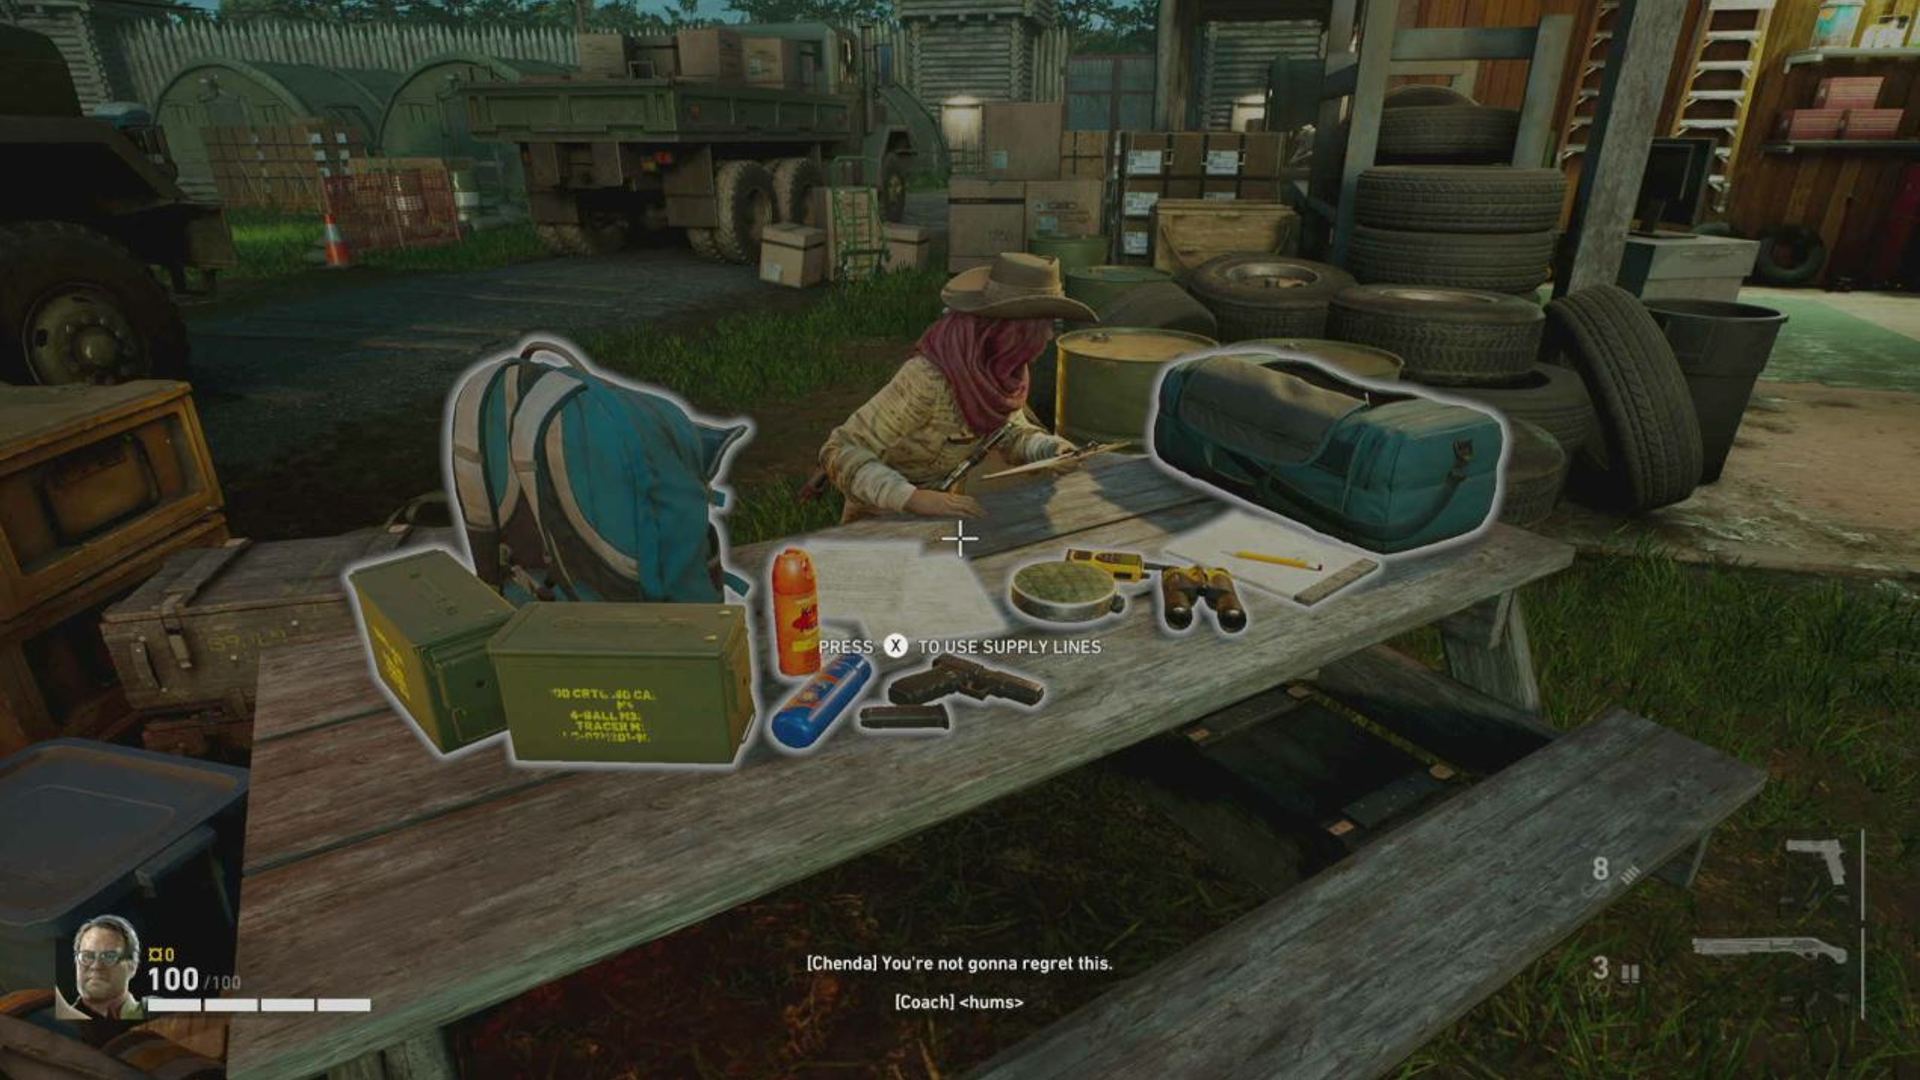 Back 4 Blood how to unlock weapon camos and skins: The Supply Line vendor can be seen sitting on her bench in Fort Hope.